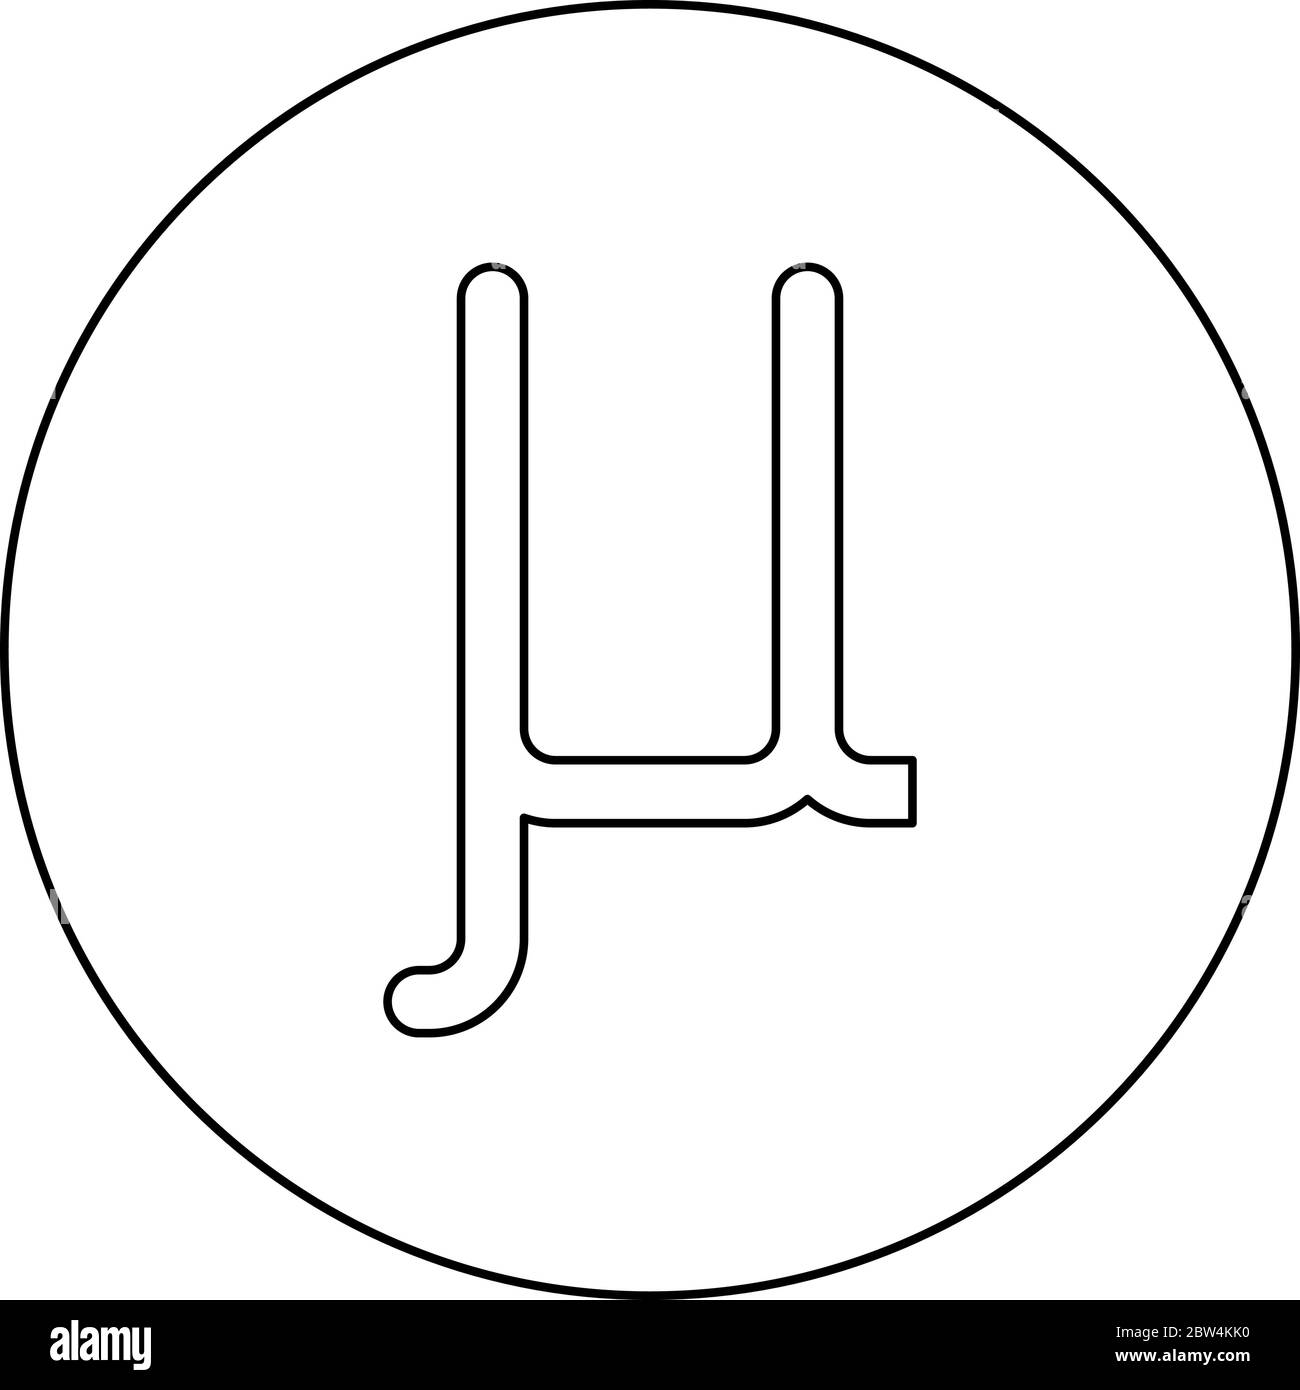 Mu greek symbol small letter lowercase font icon in circle round outline black color vector illustration flat style simple image Stock Vector